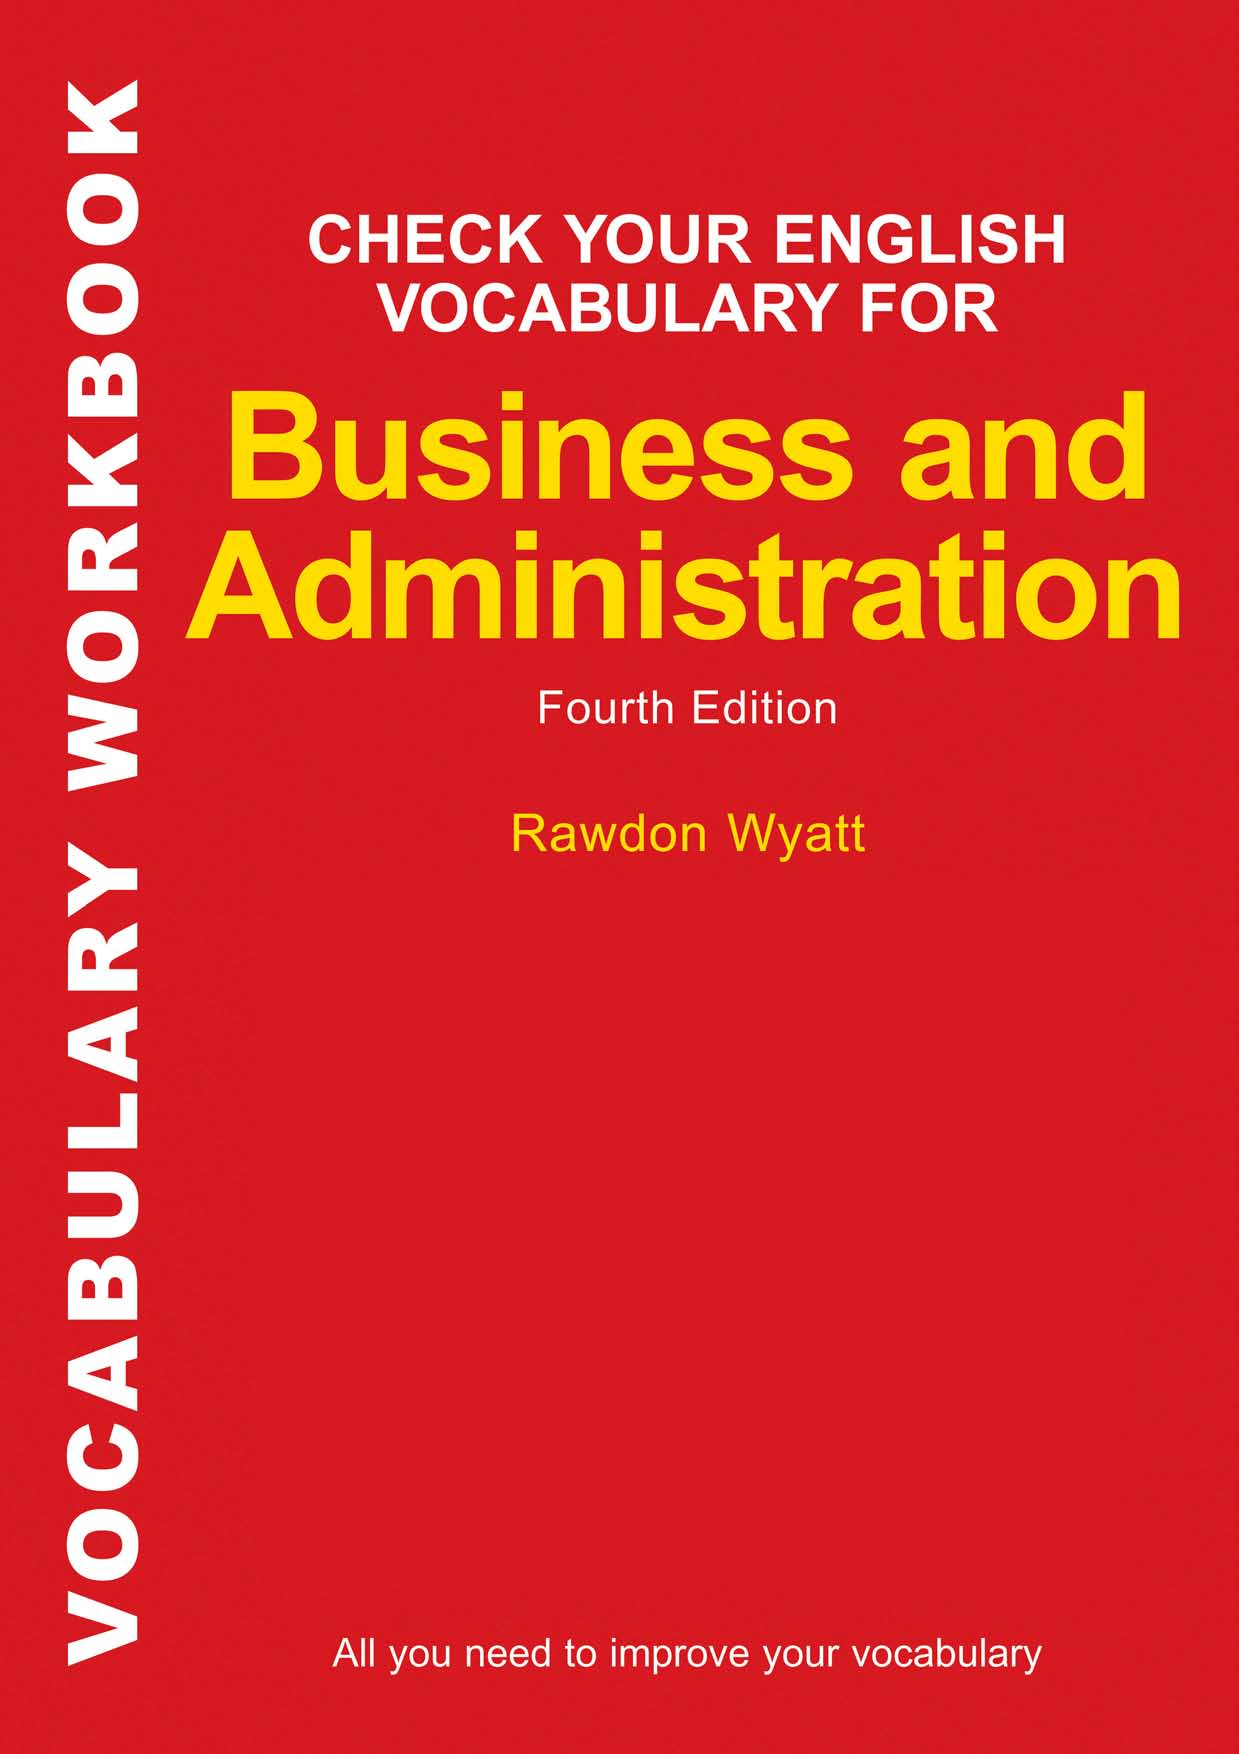 Check Your English Vocabulary for Business and Administration_